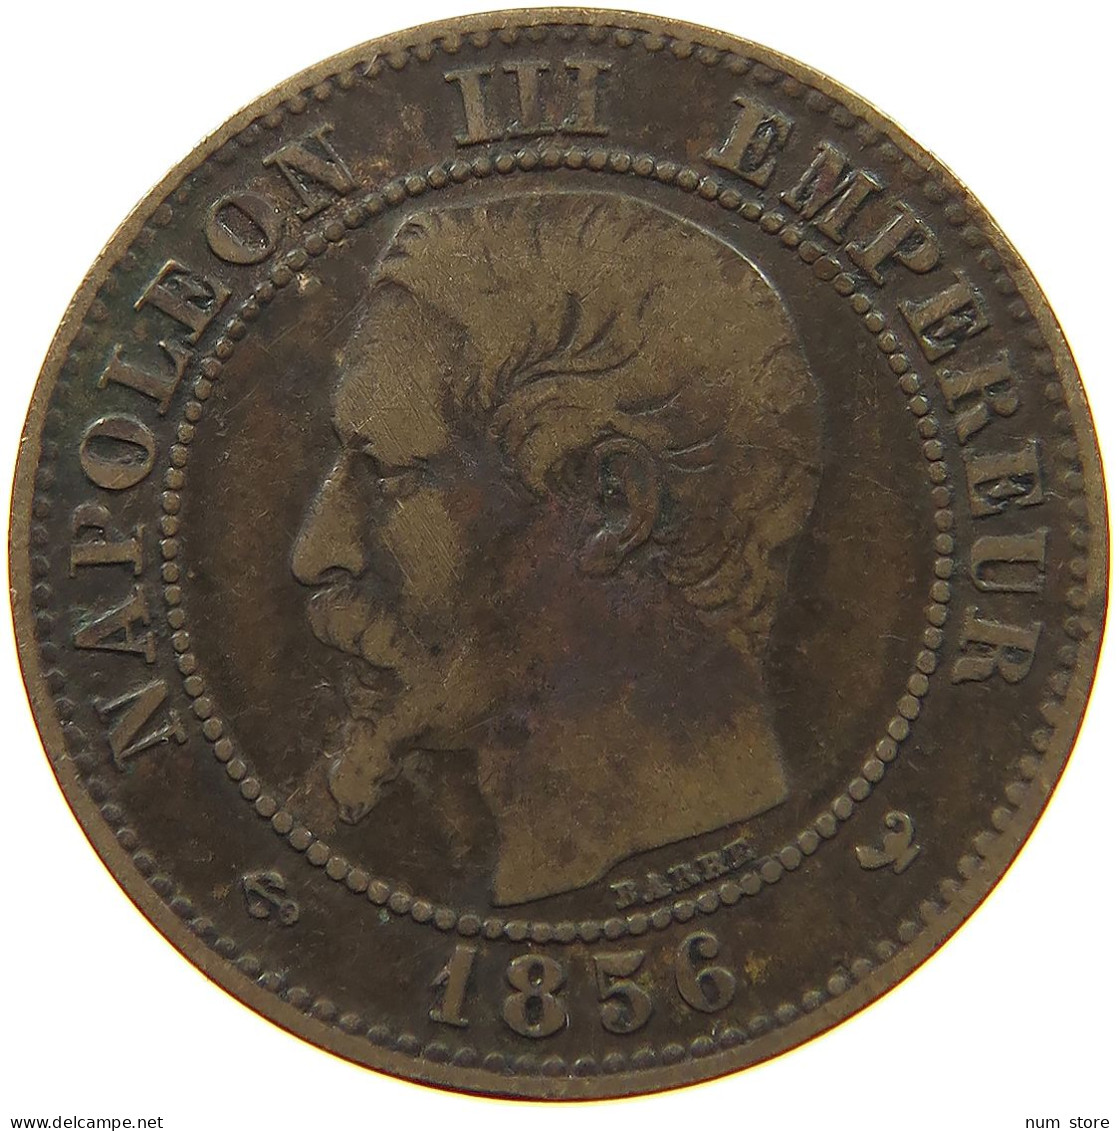 FRANCE 2 CENTIMES 1856 W #a012 0549 - 2 Centimes